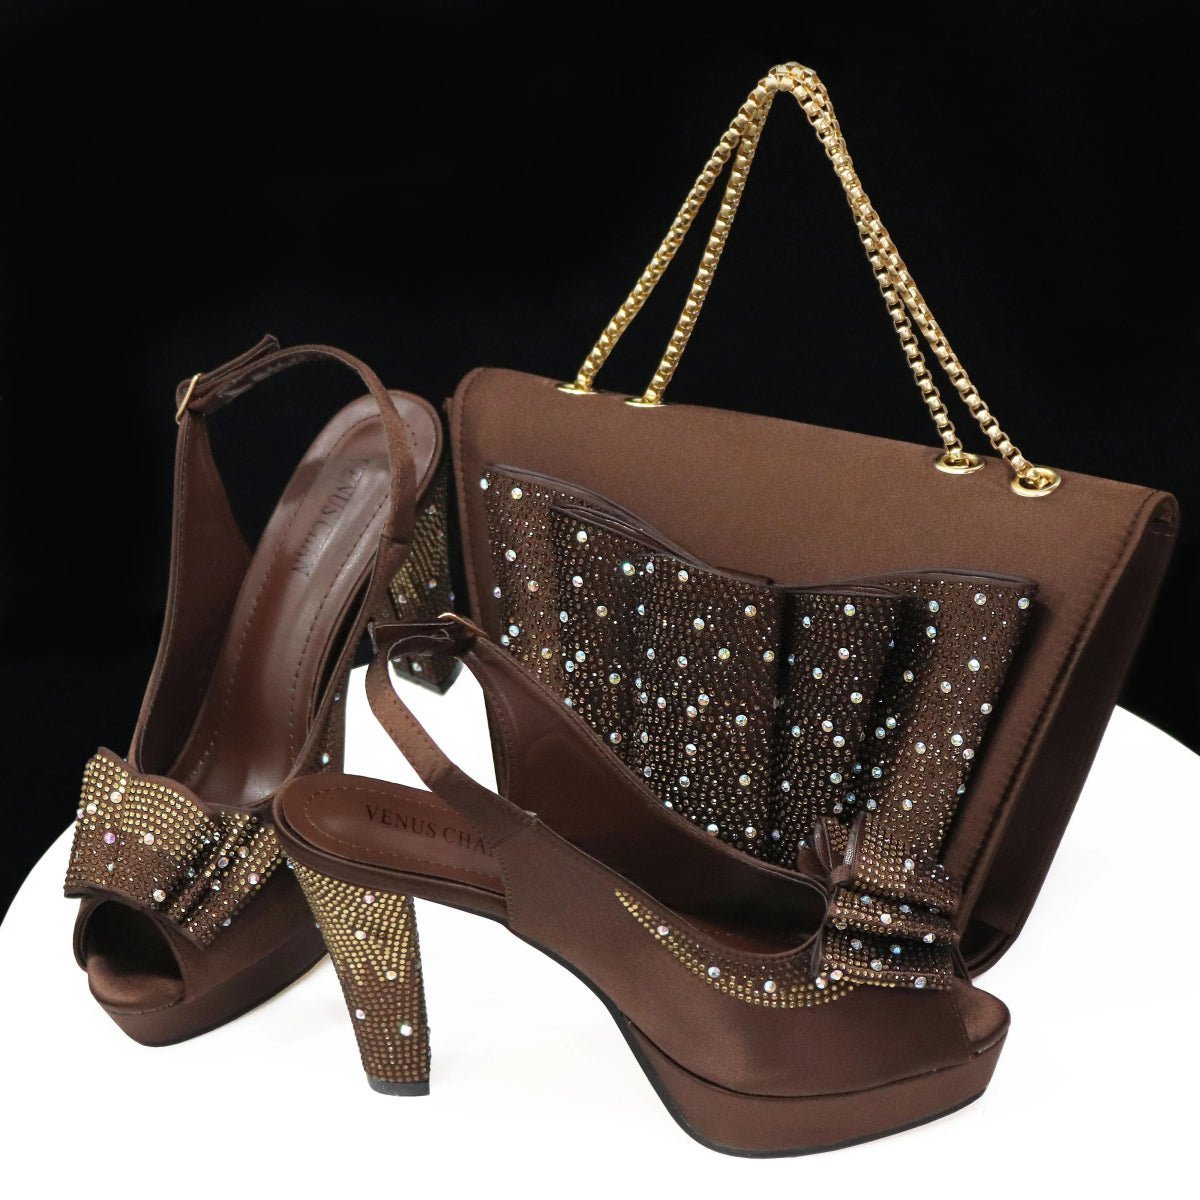 Style Harmony: Italian Shoes & Bag Set for Weddings, Parties - - Women - Shoes - Milvertons